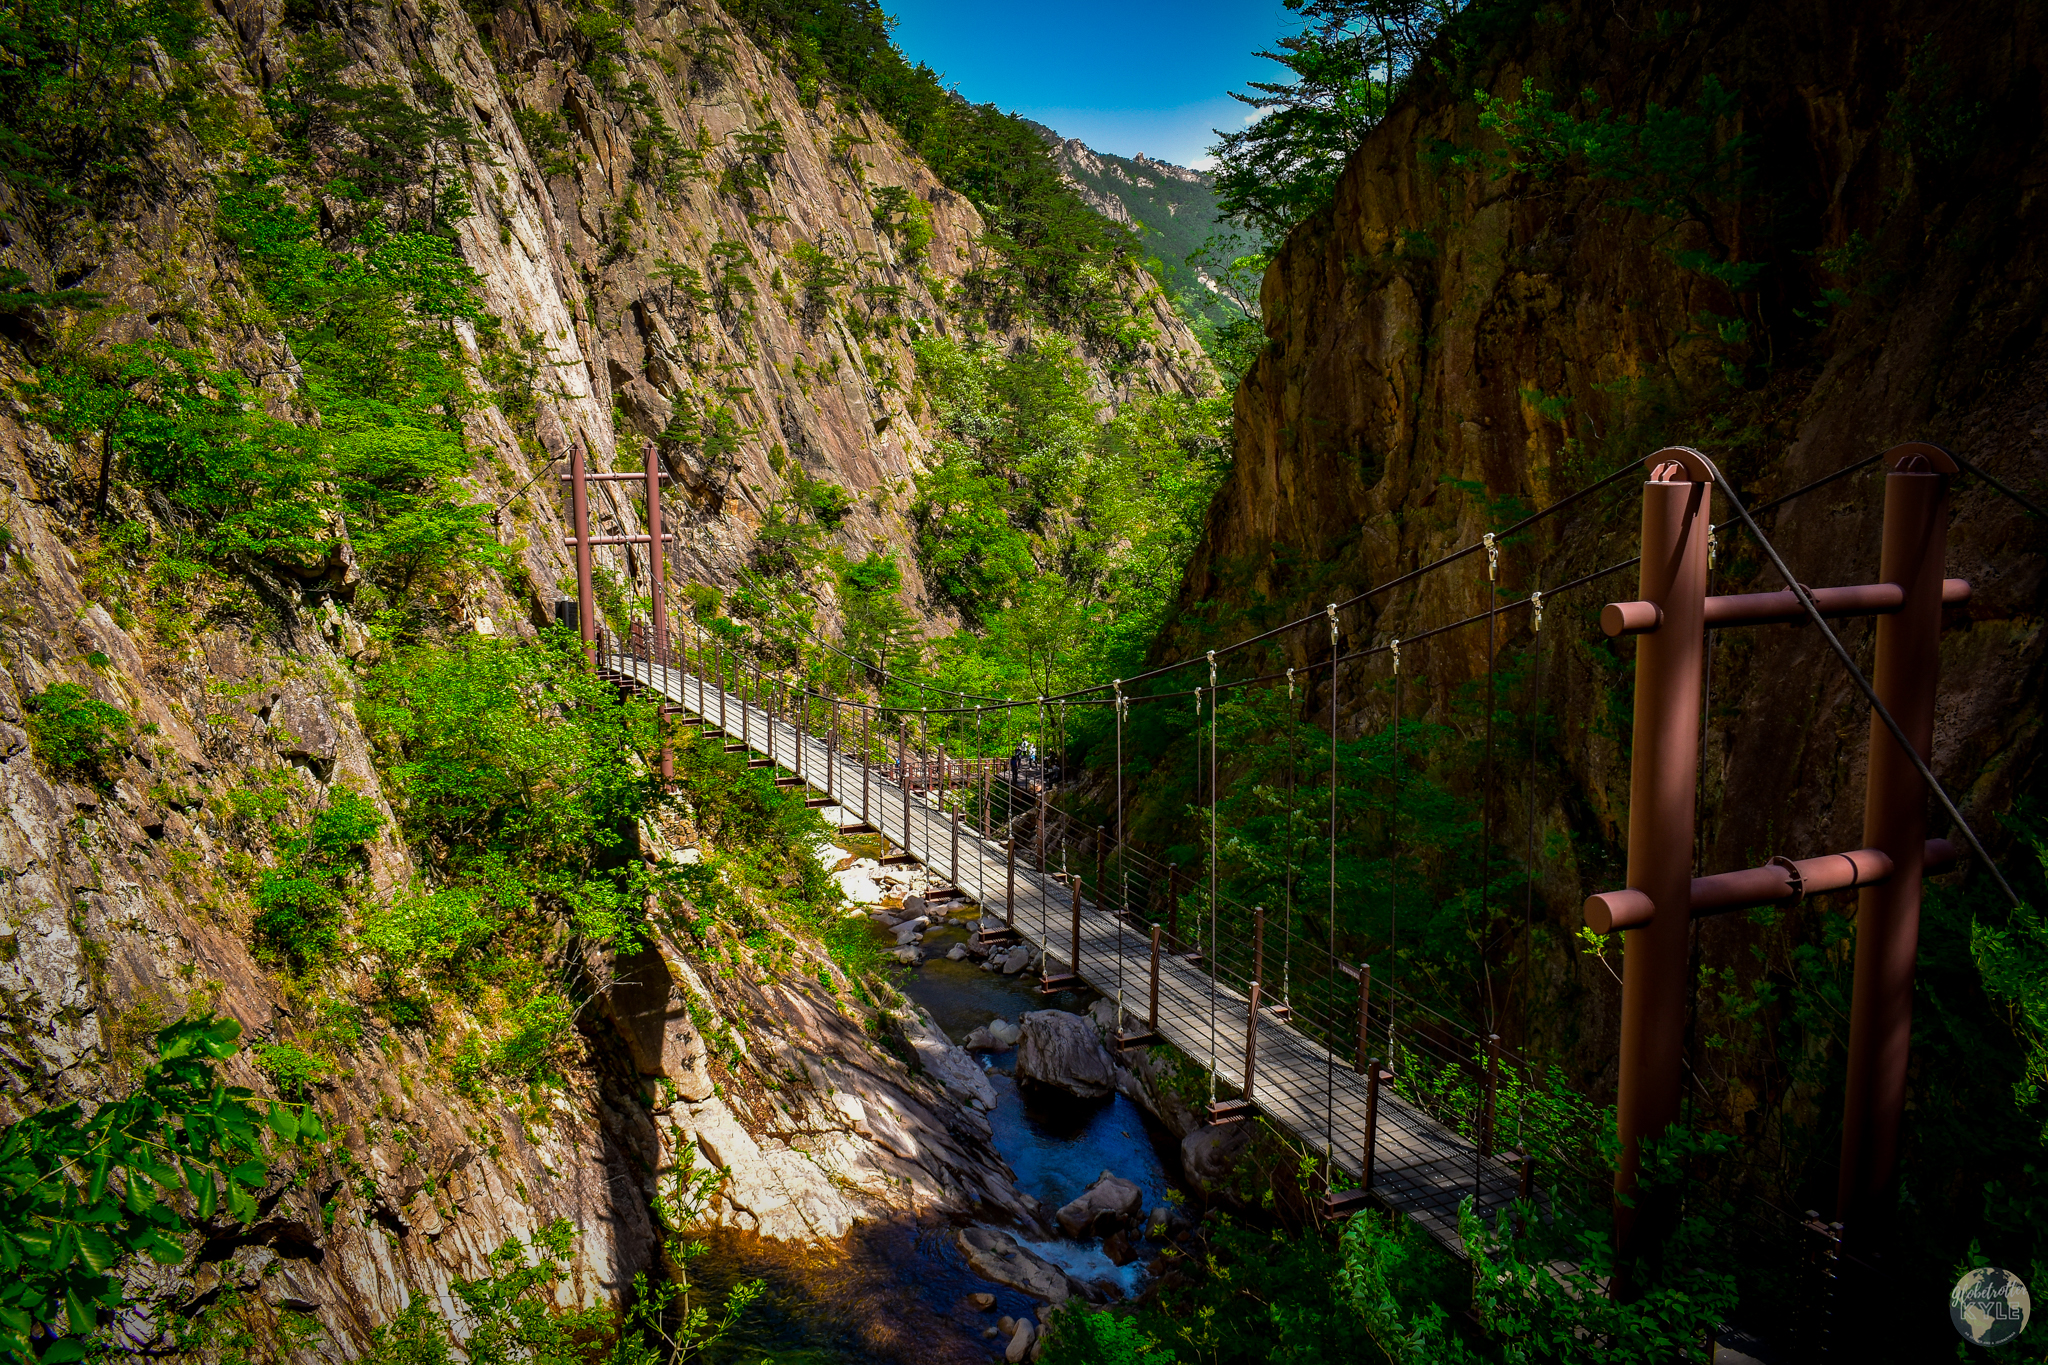 A bridge over a river in the middle of a valley in Seoraksan National Park, South Korea Guide for Sokcho and Seoraksan